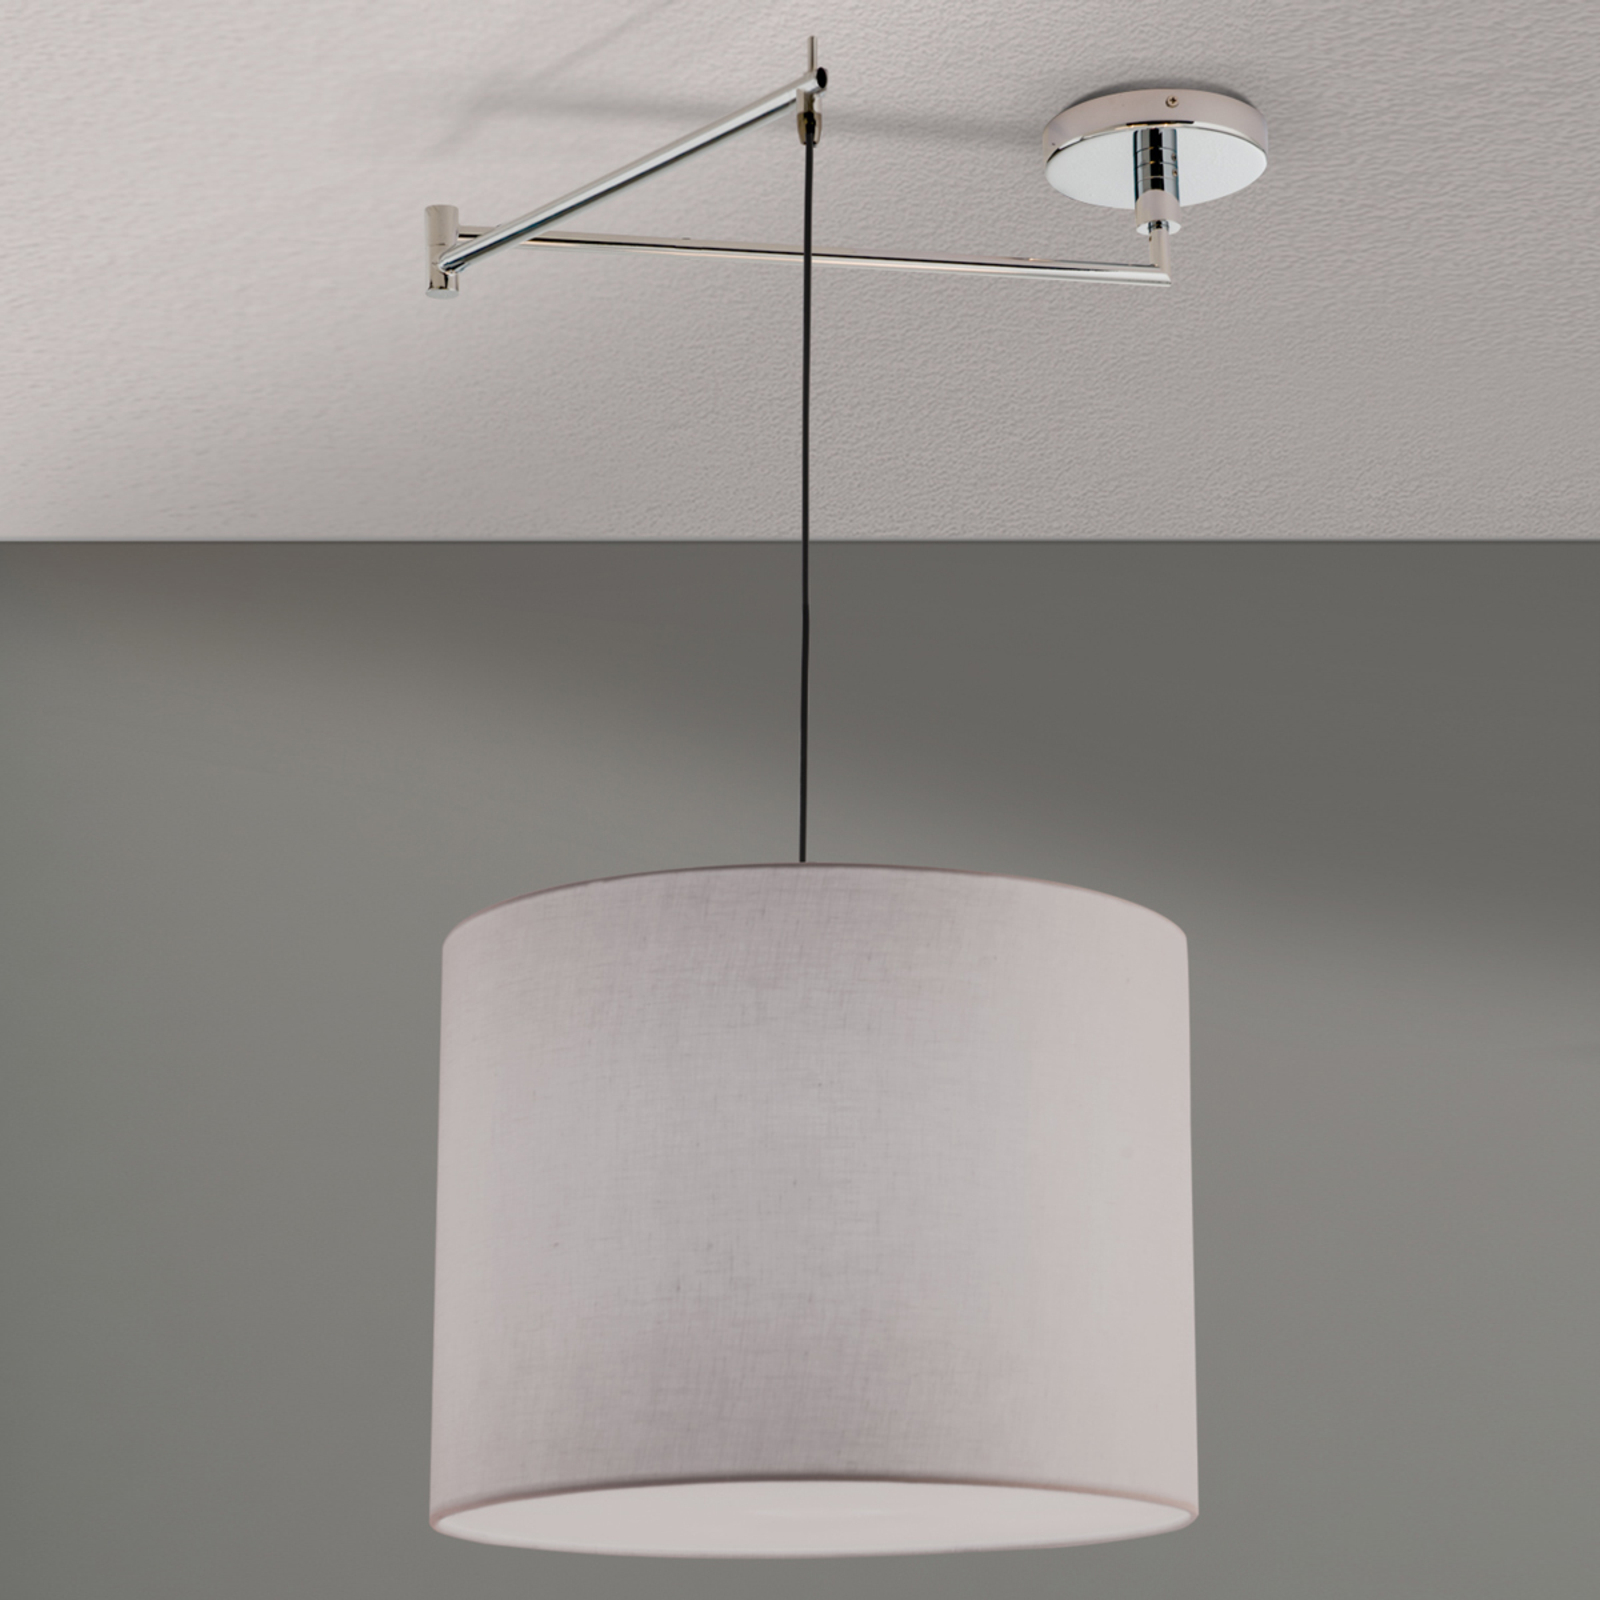 Hanging light Artak with a white fabric lampshade